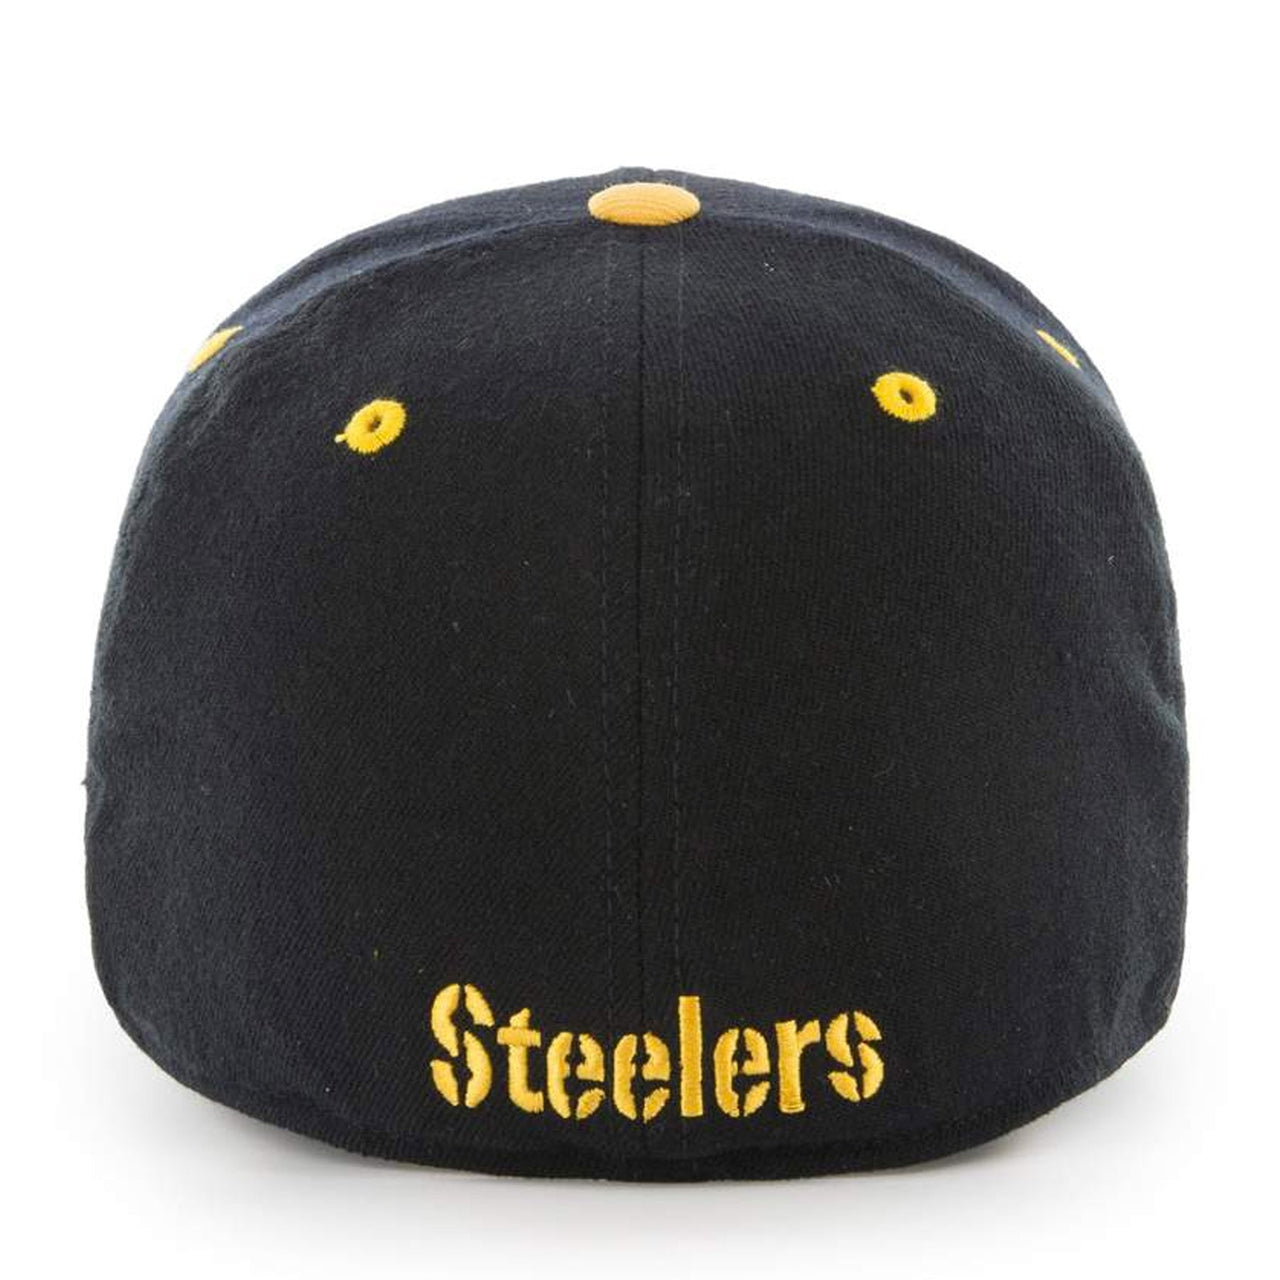 On the back of the Pittsburgh Steelers Stretch Fit Hat is the steelers wordmark embroidered in yellow